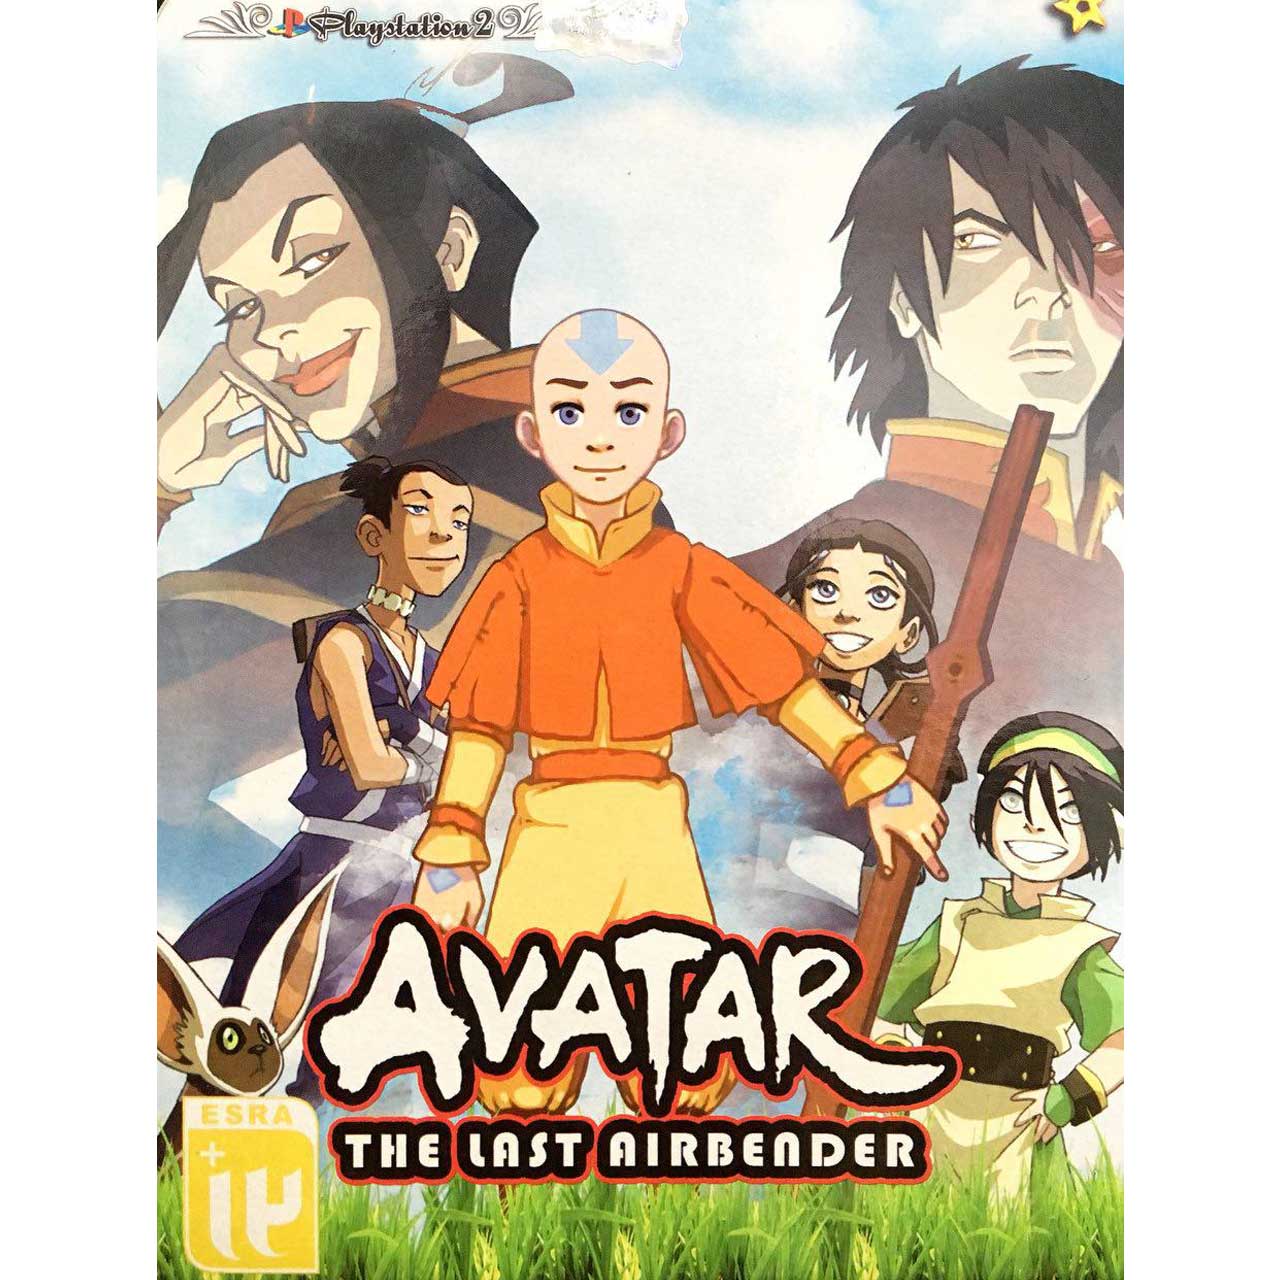 Avatar The Last Airbender Sony PlayStation 2 2006 for sale online  eBay